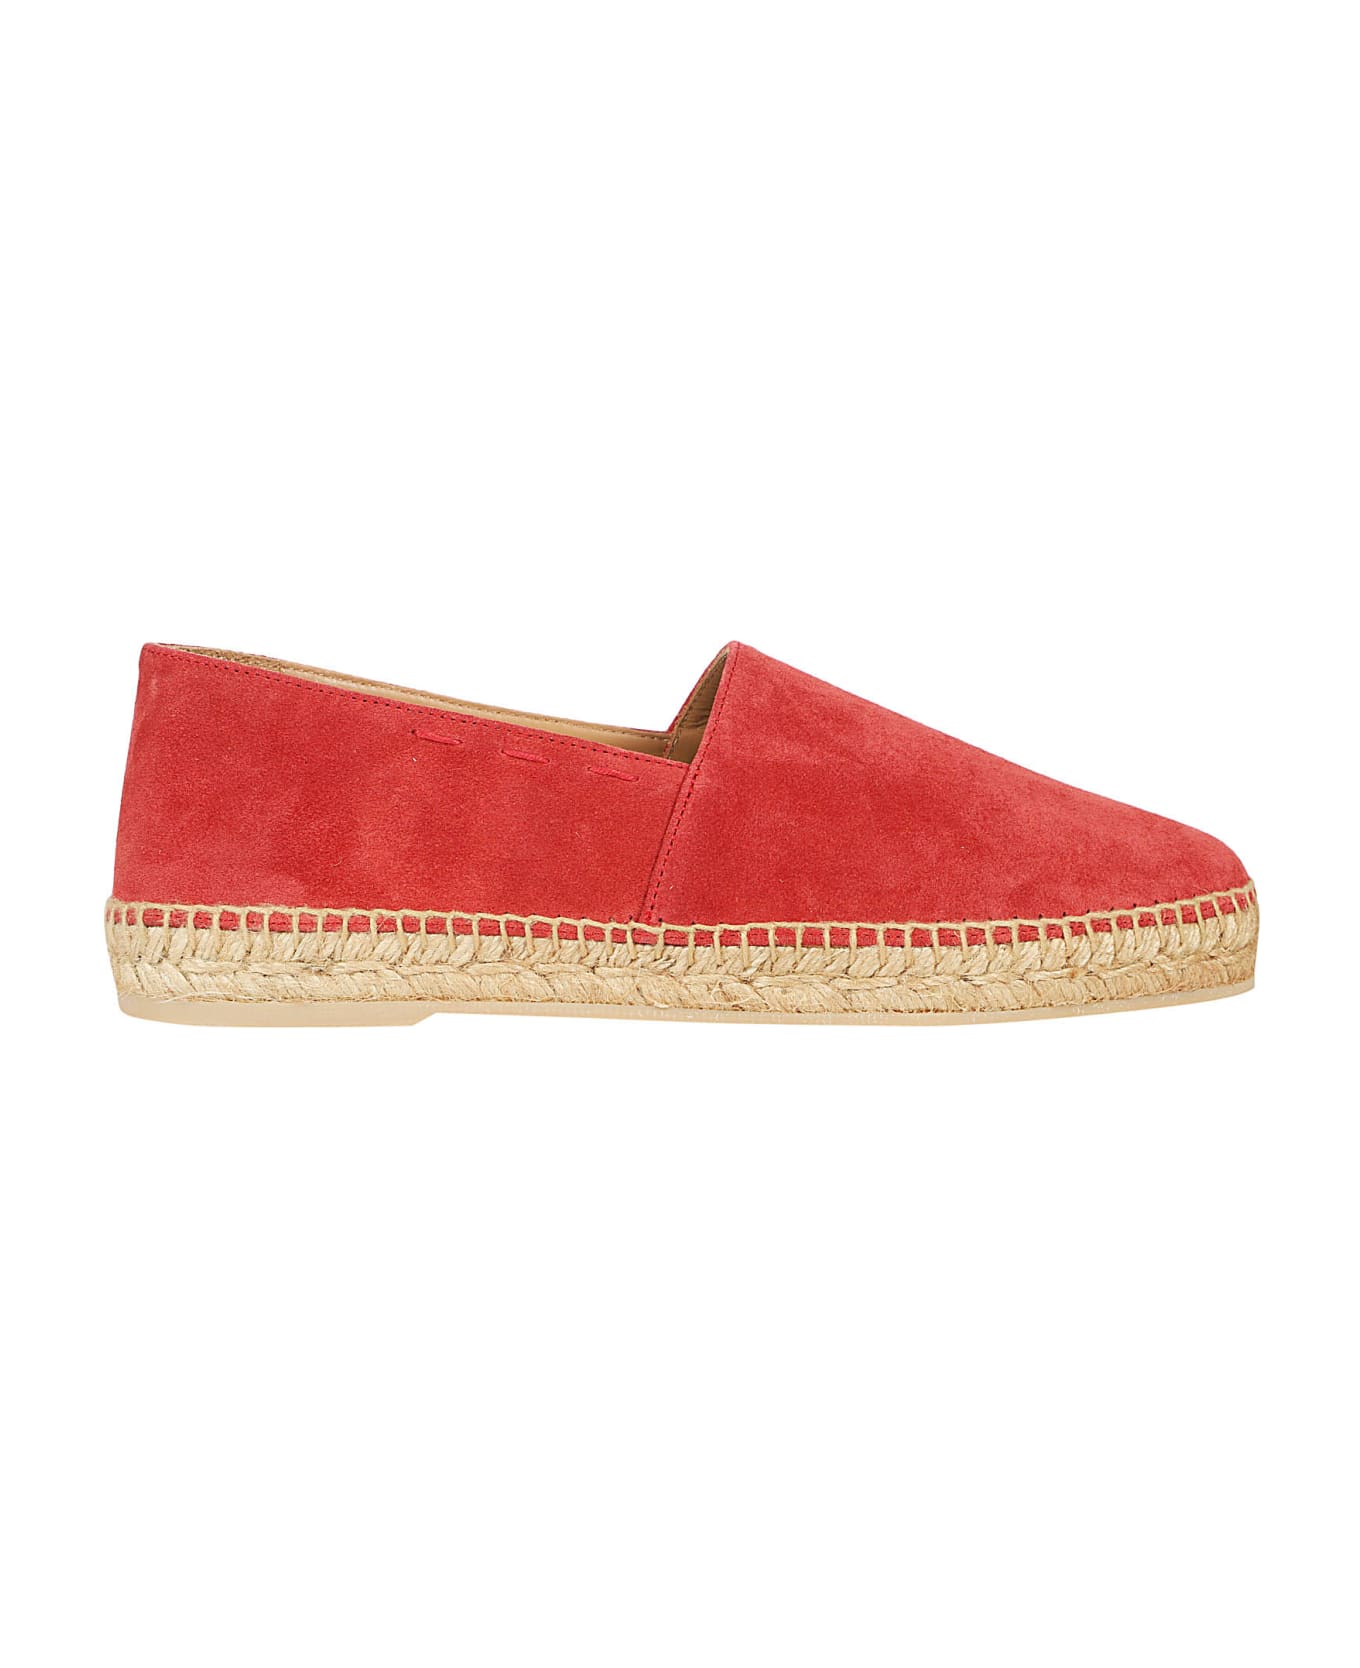 Kiton A048 Espadrilles - Rosso その他各種シューズ